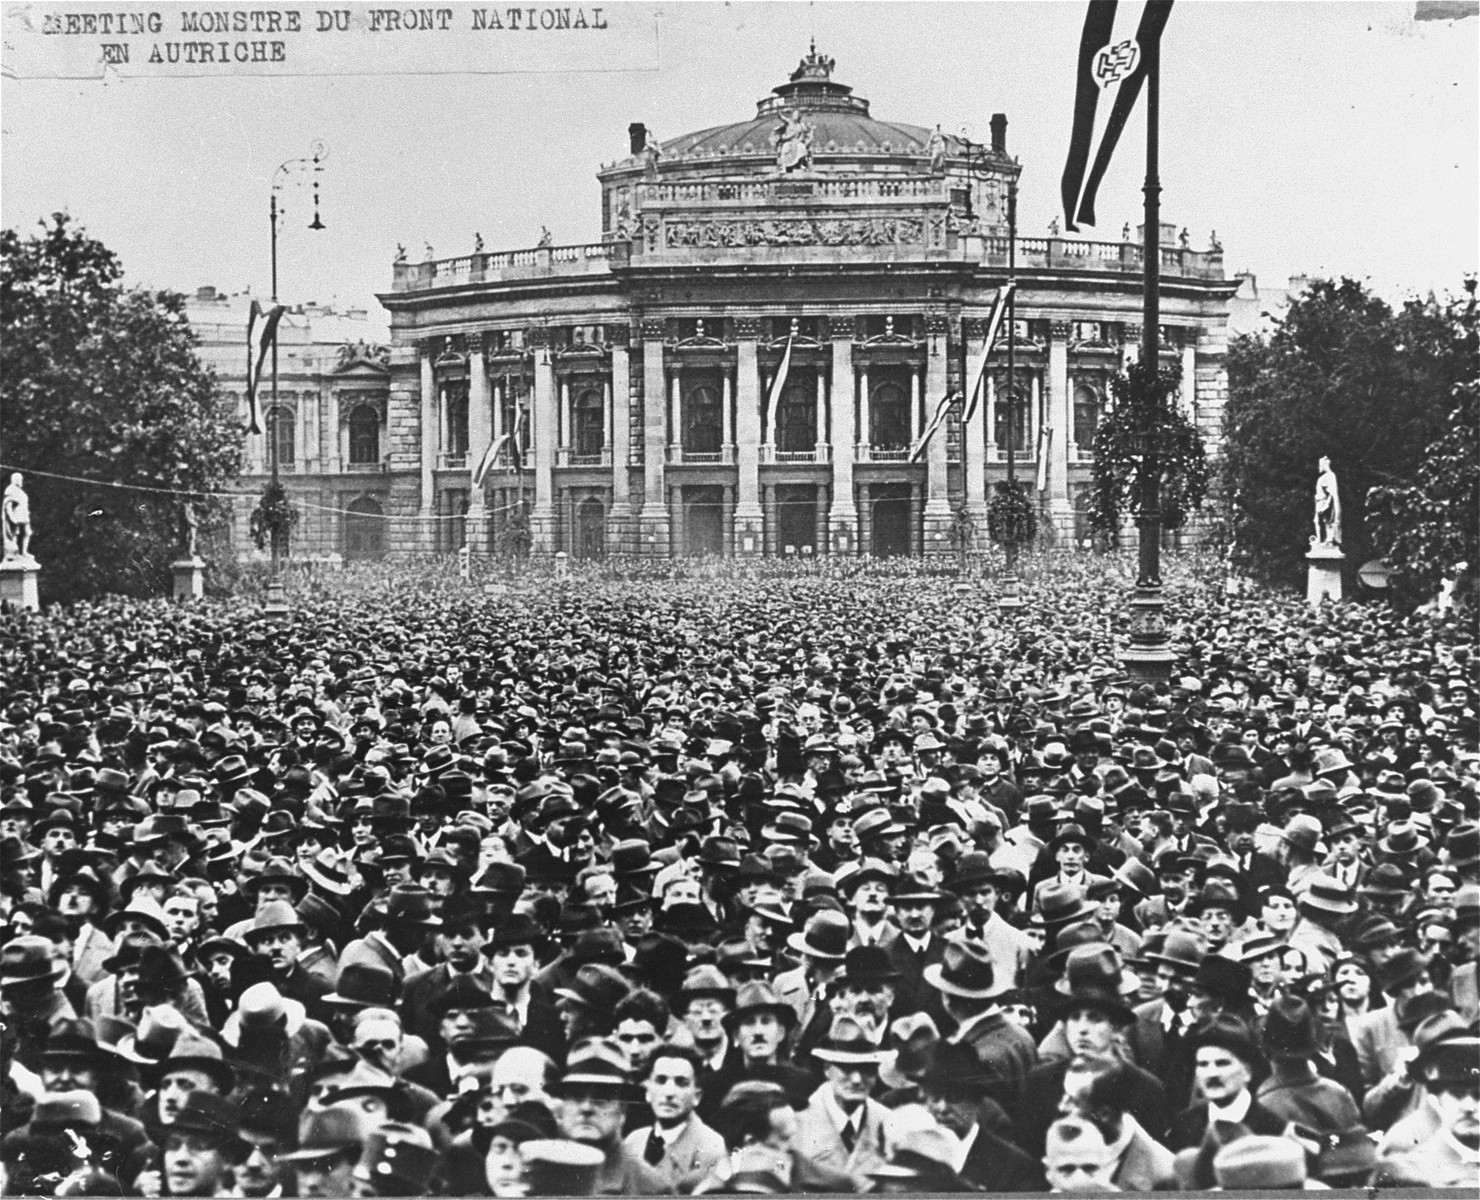 Members of the Patriotic Front gather at the "Rauthaus" to hear a speech by Chancellor Kurt Schusschnigg.